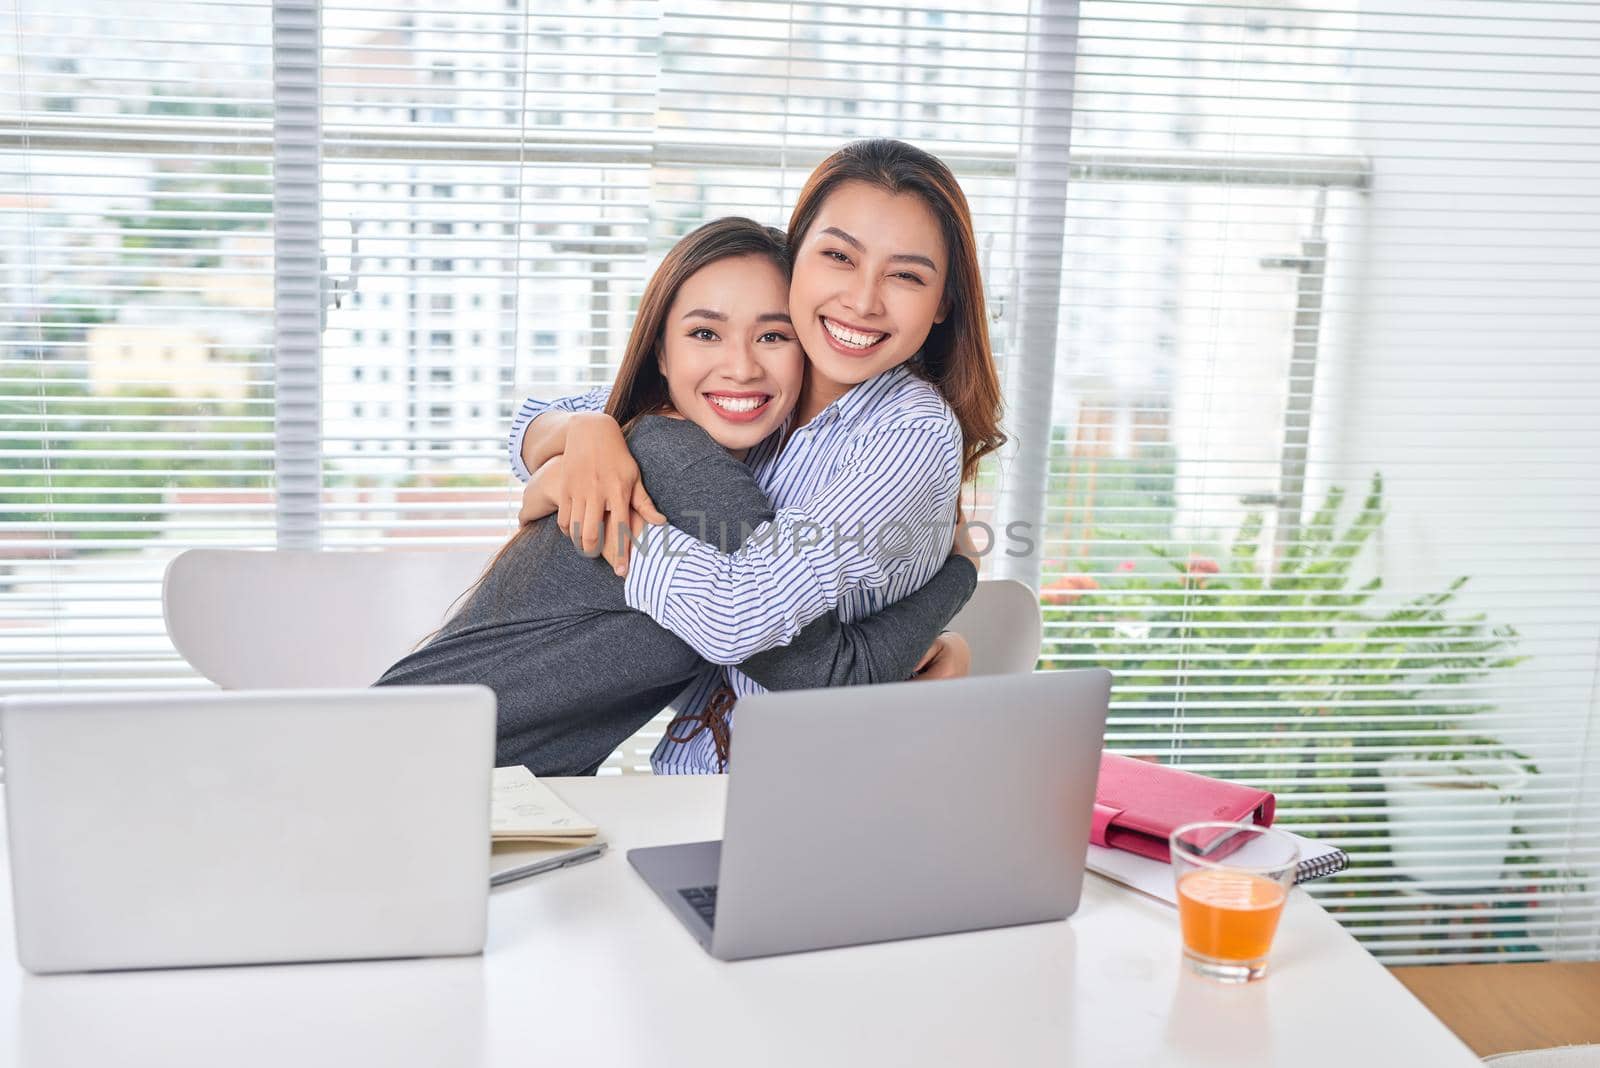 Indoor portrait of smiling girls working together in office. Pretty woman spending time with friend during break and posing for photo in library. by makidotvn